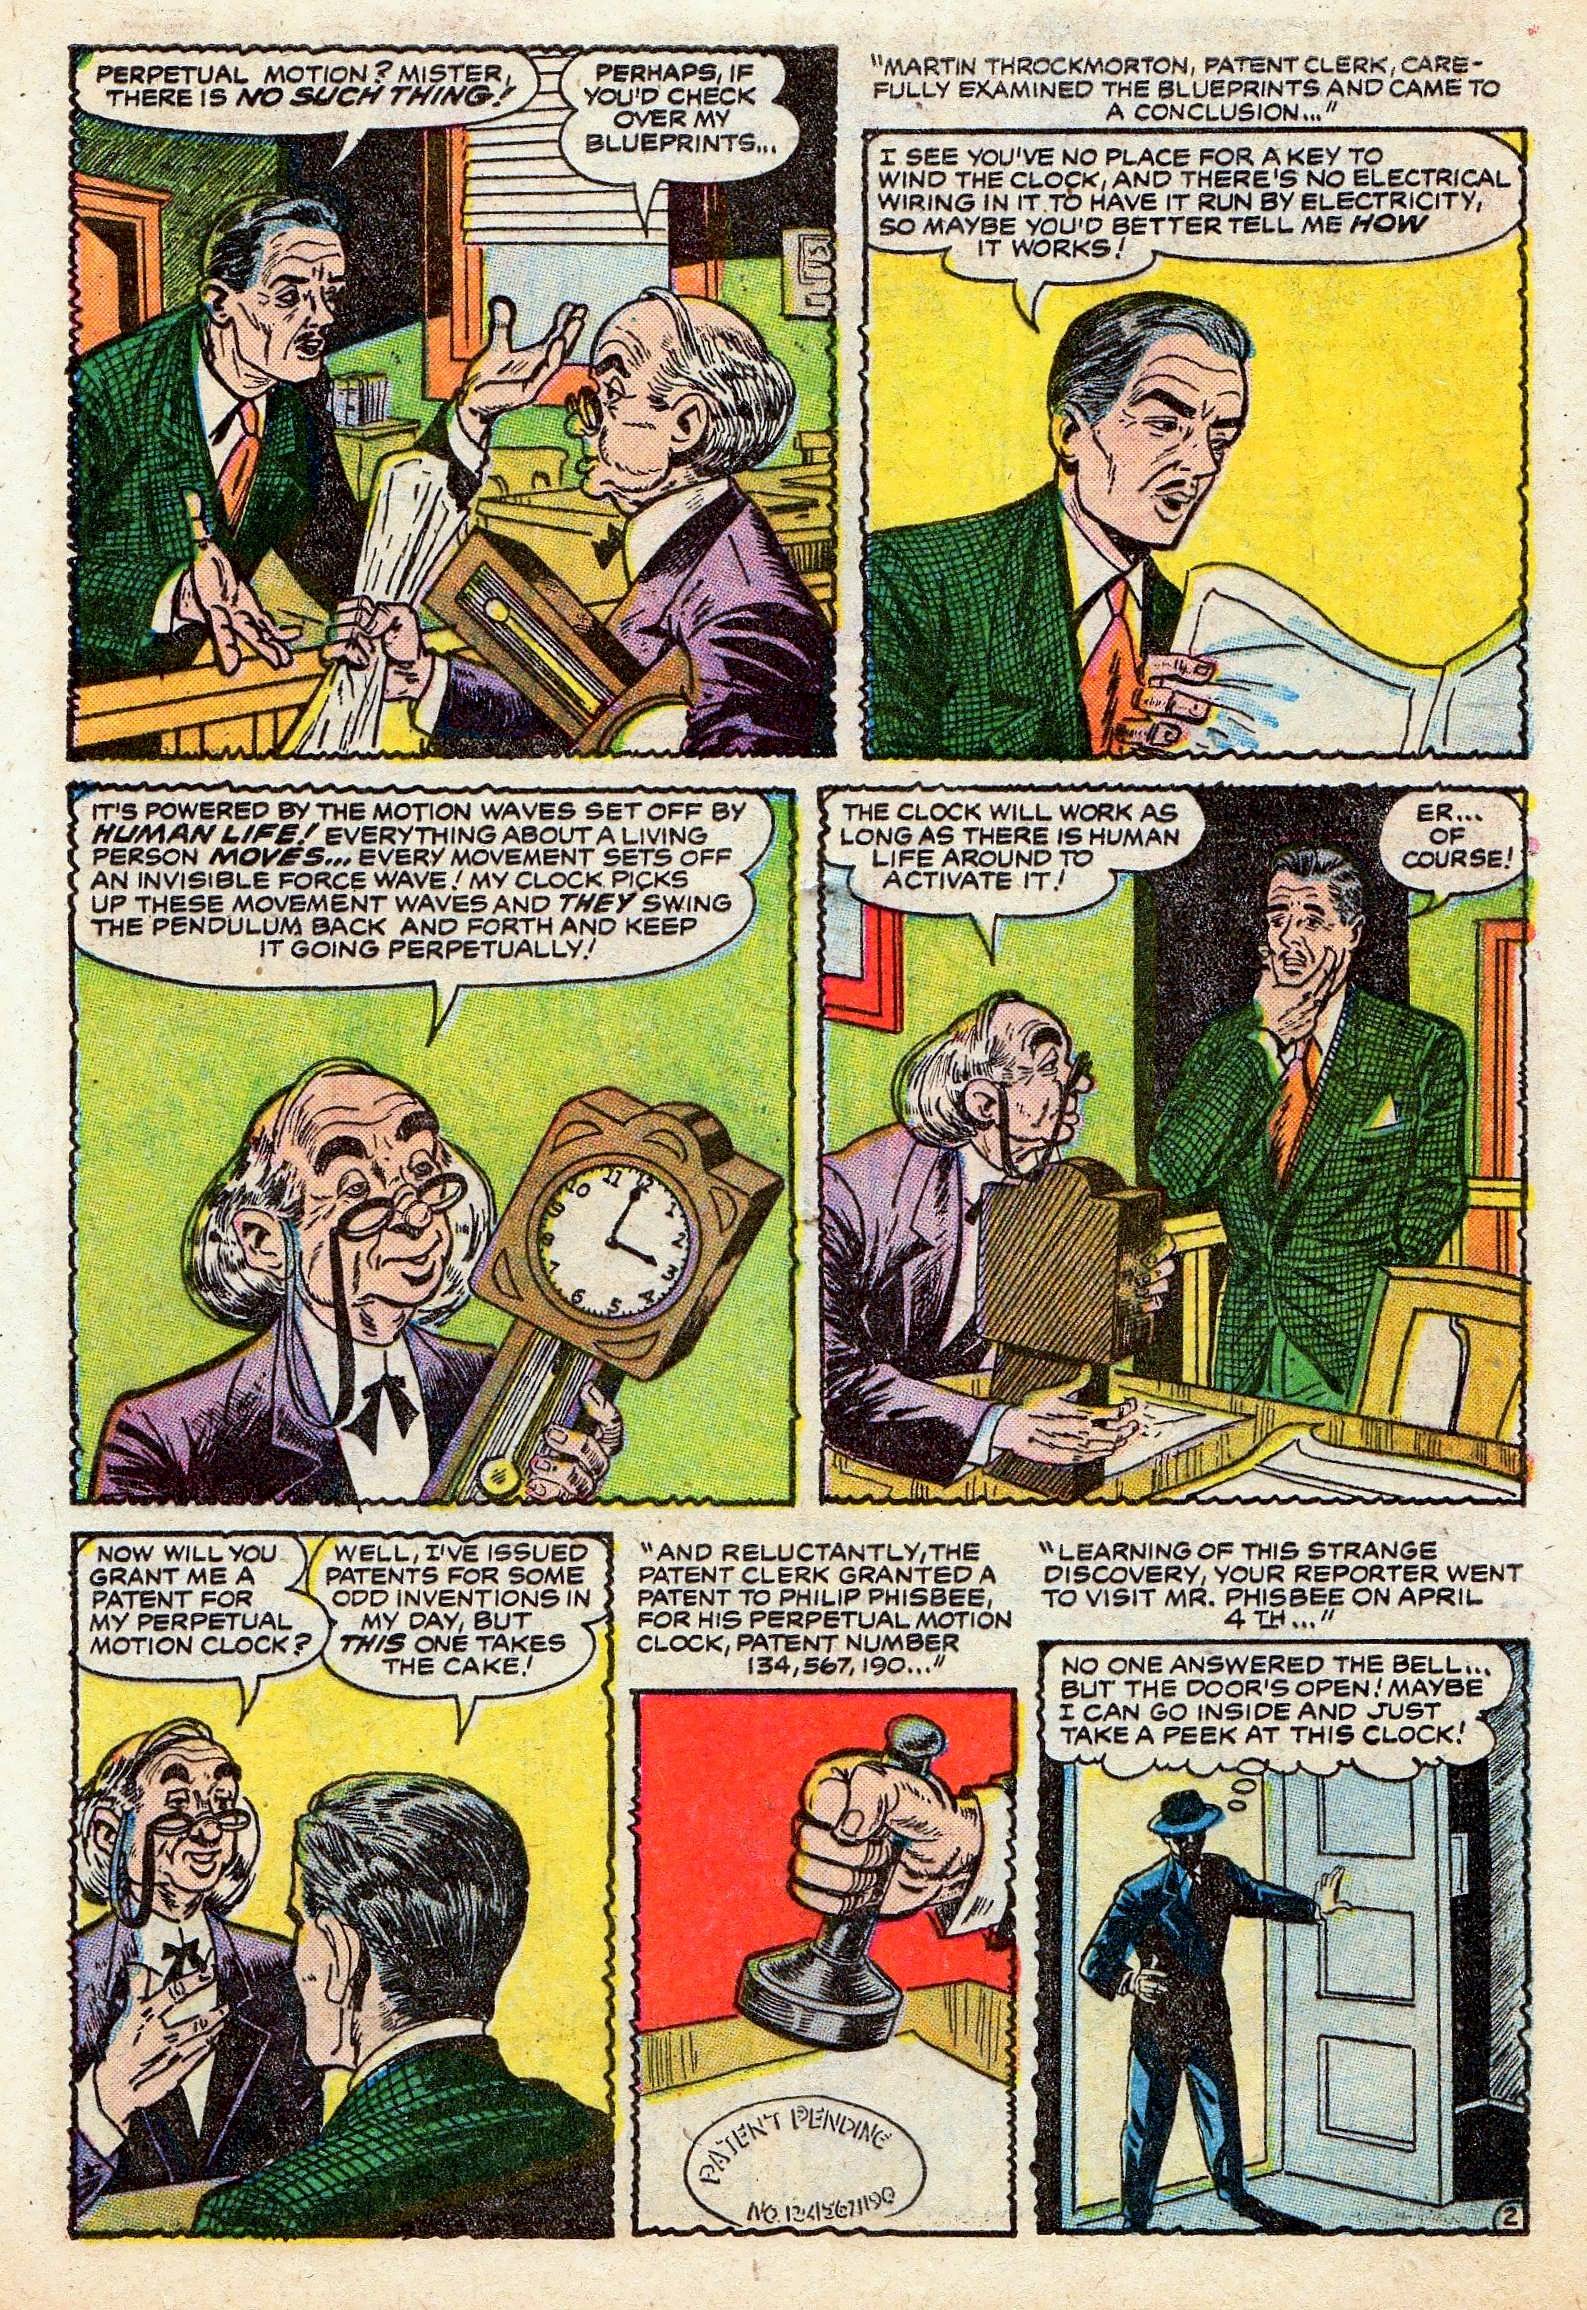 Marvel Tales (1949) 136 Page 16